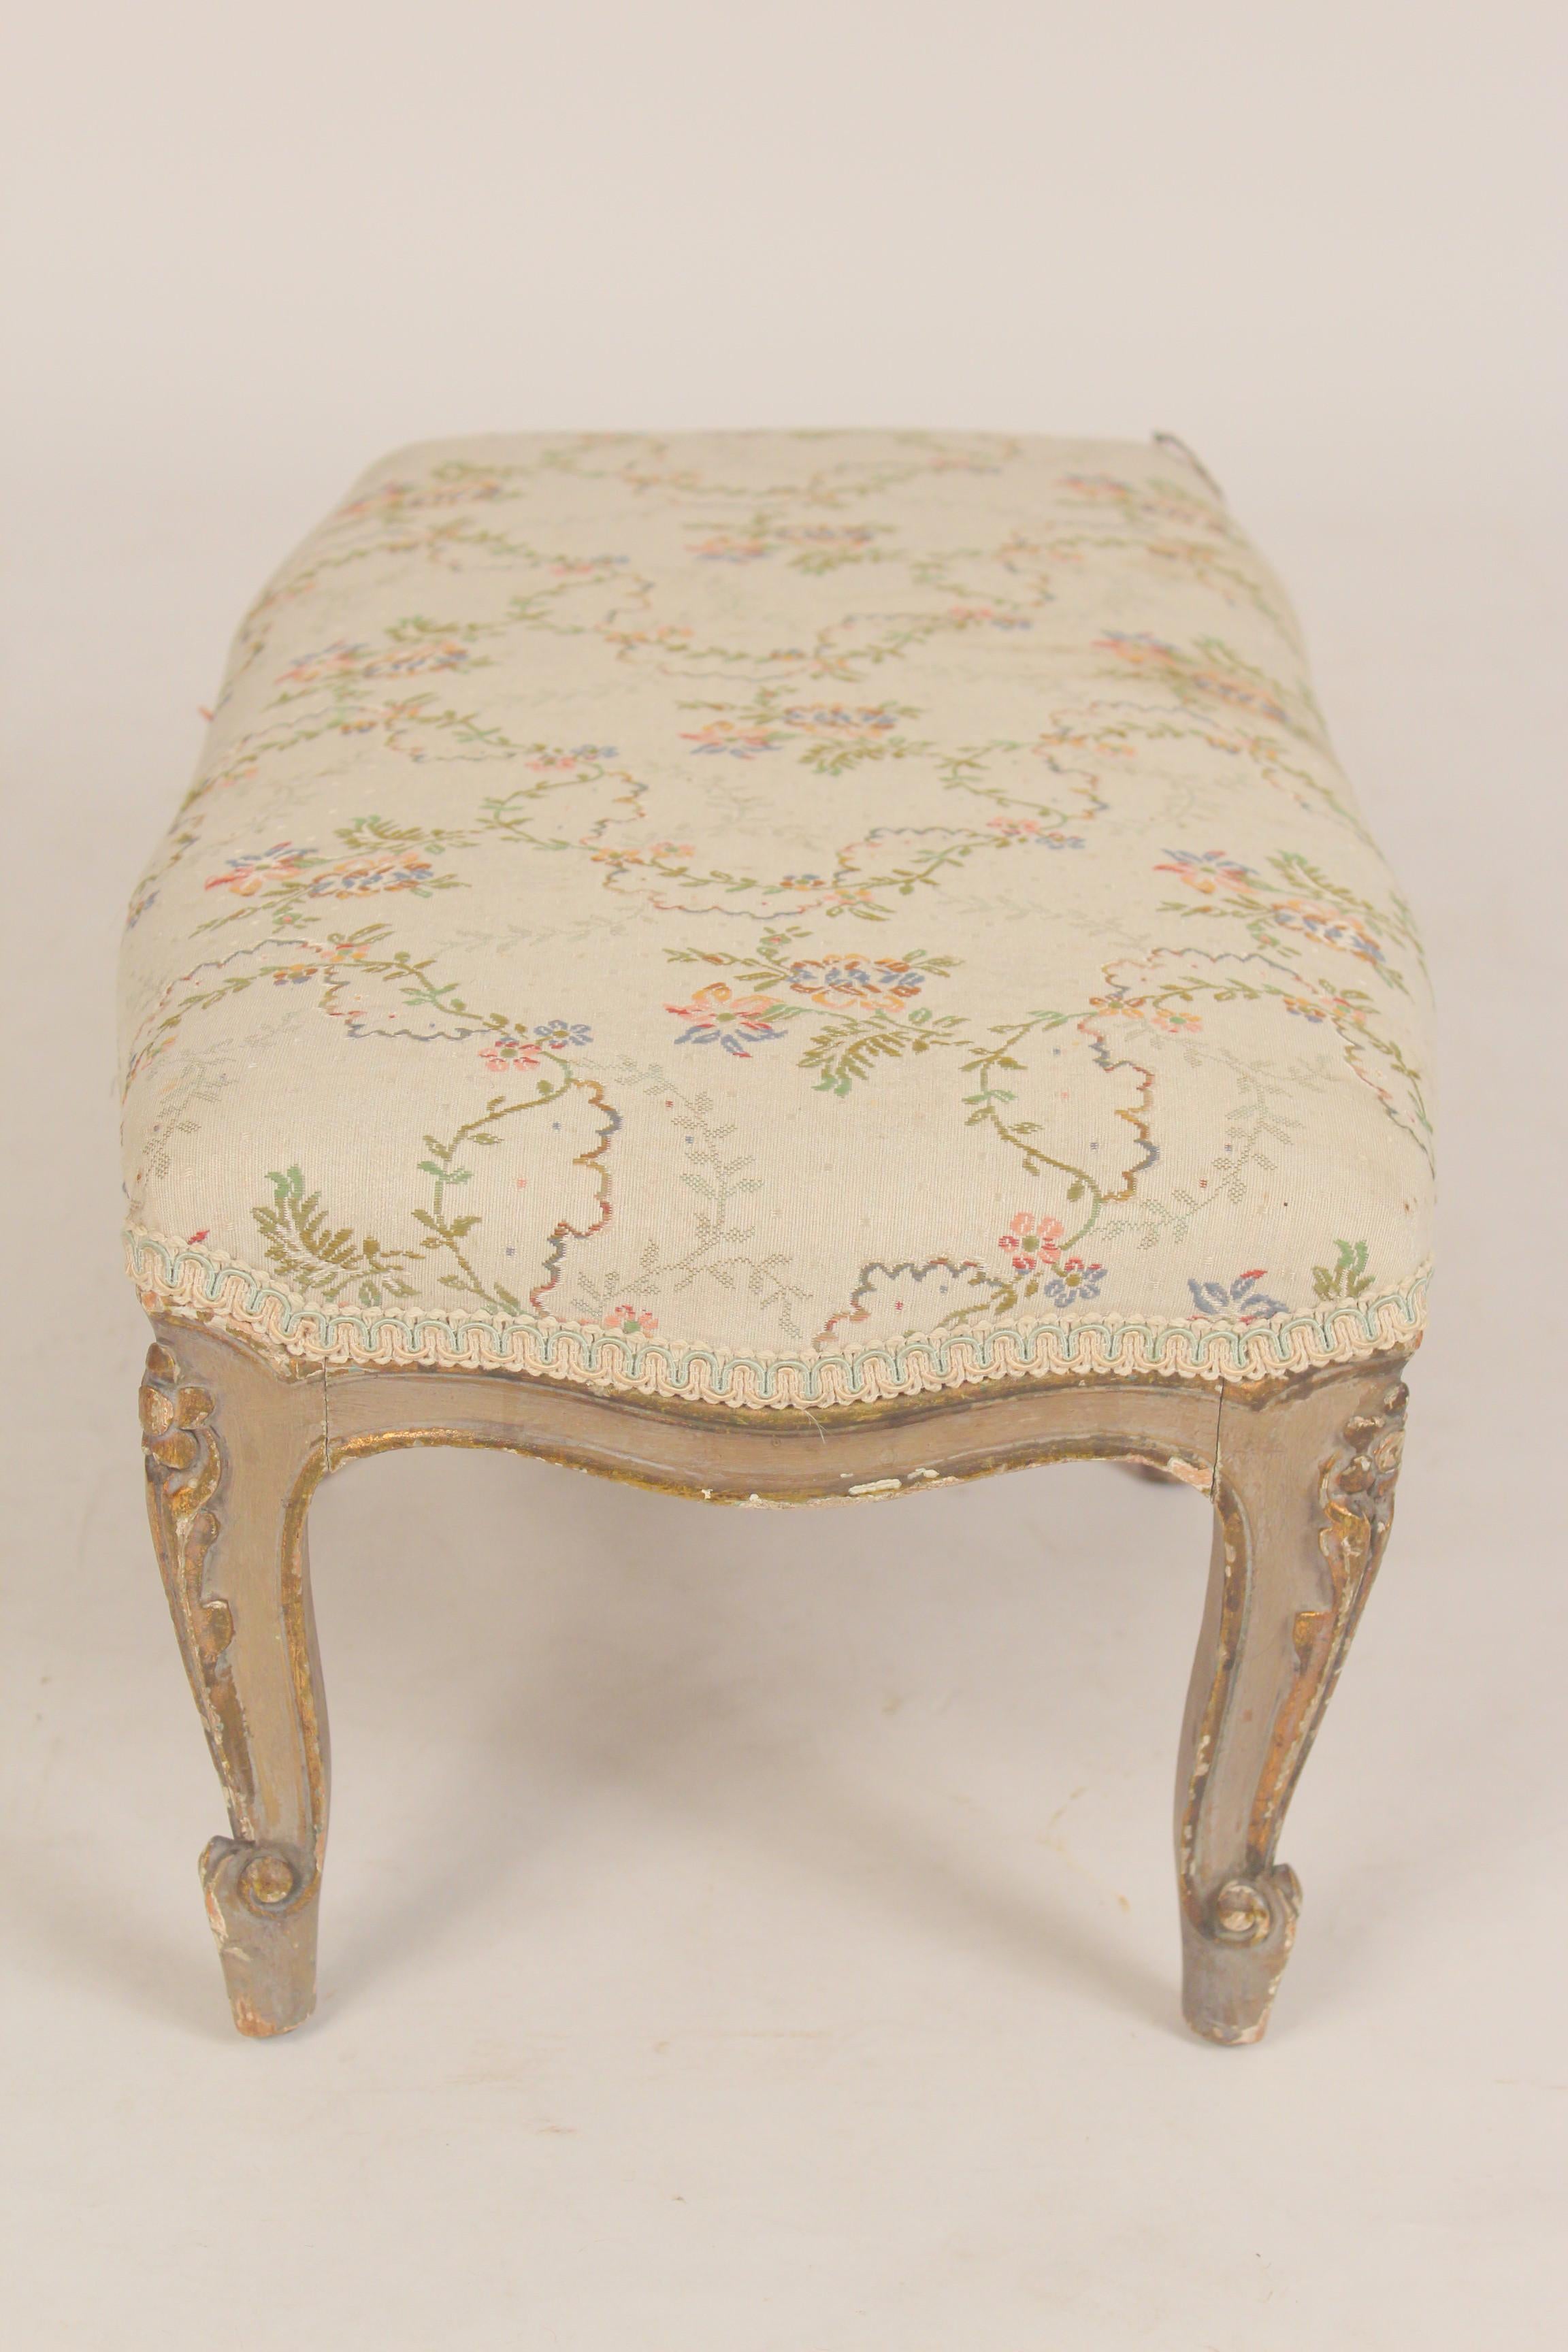 Louis XV Style Painted and Gilt Decorated Footstool In Good Condition For Sale In Laguna Beach, CA